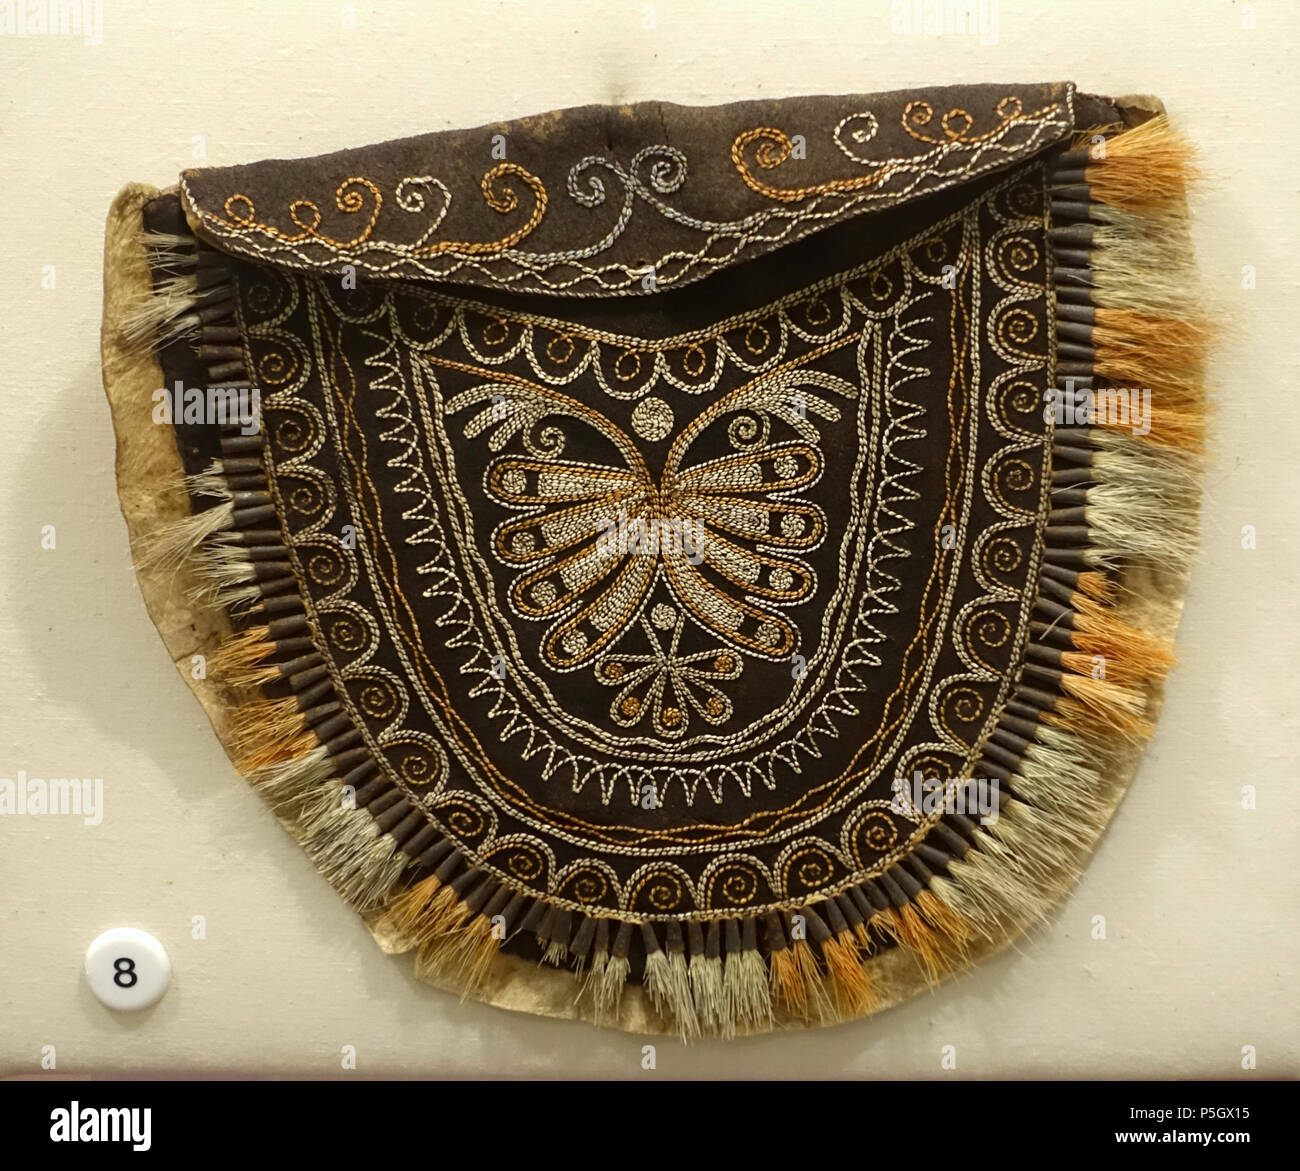 N/A. English: Exhibit from the Native American Collection, Peabody Museum, Harvard University, Cambridge, Massachusetts, USA. Photography was permitted without restriction; exhibit is old enough so that it is in the . 27 May 2017, 14:09:14. Daderot 431 Deerskin bag, Iroquois, from American Antiquarian Society collection, to Peabody in 1890 - Native American collection - Peabody Museum, Harvard University - DSC05817 Stock Photo